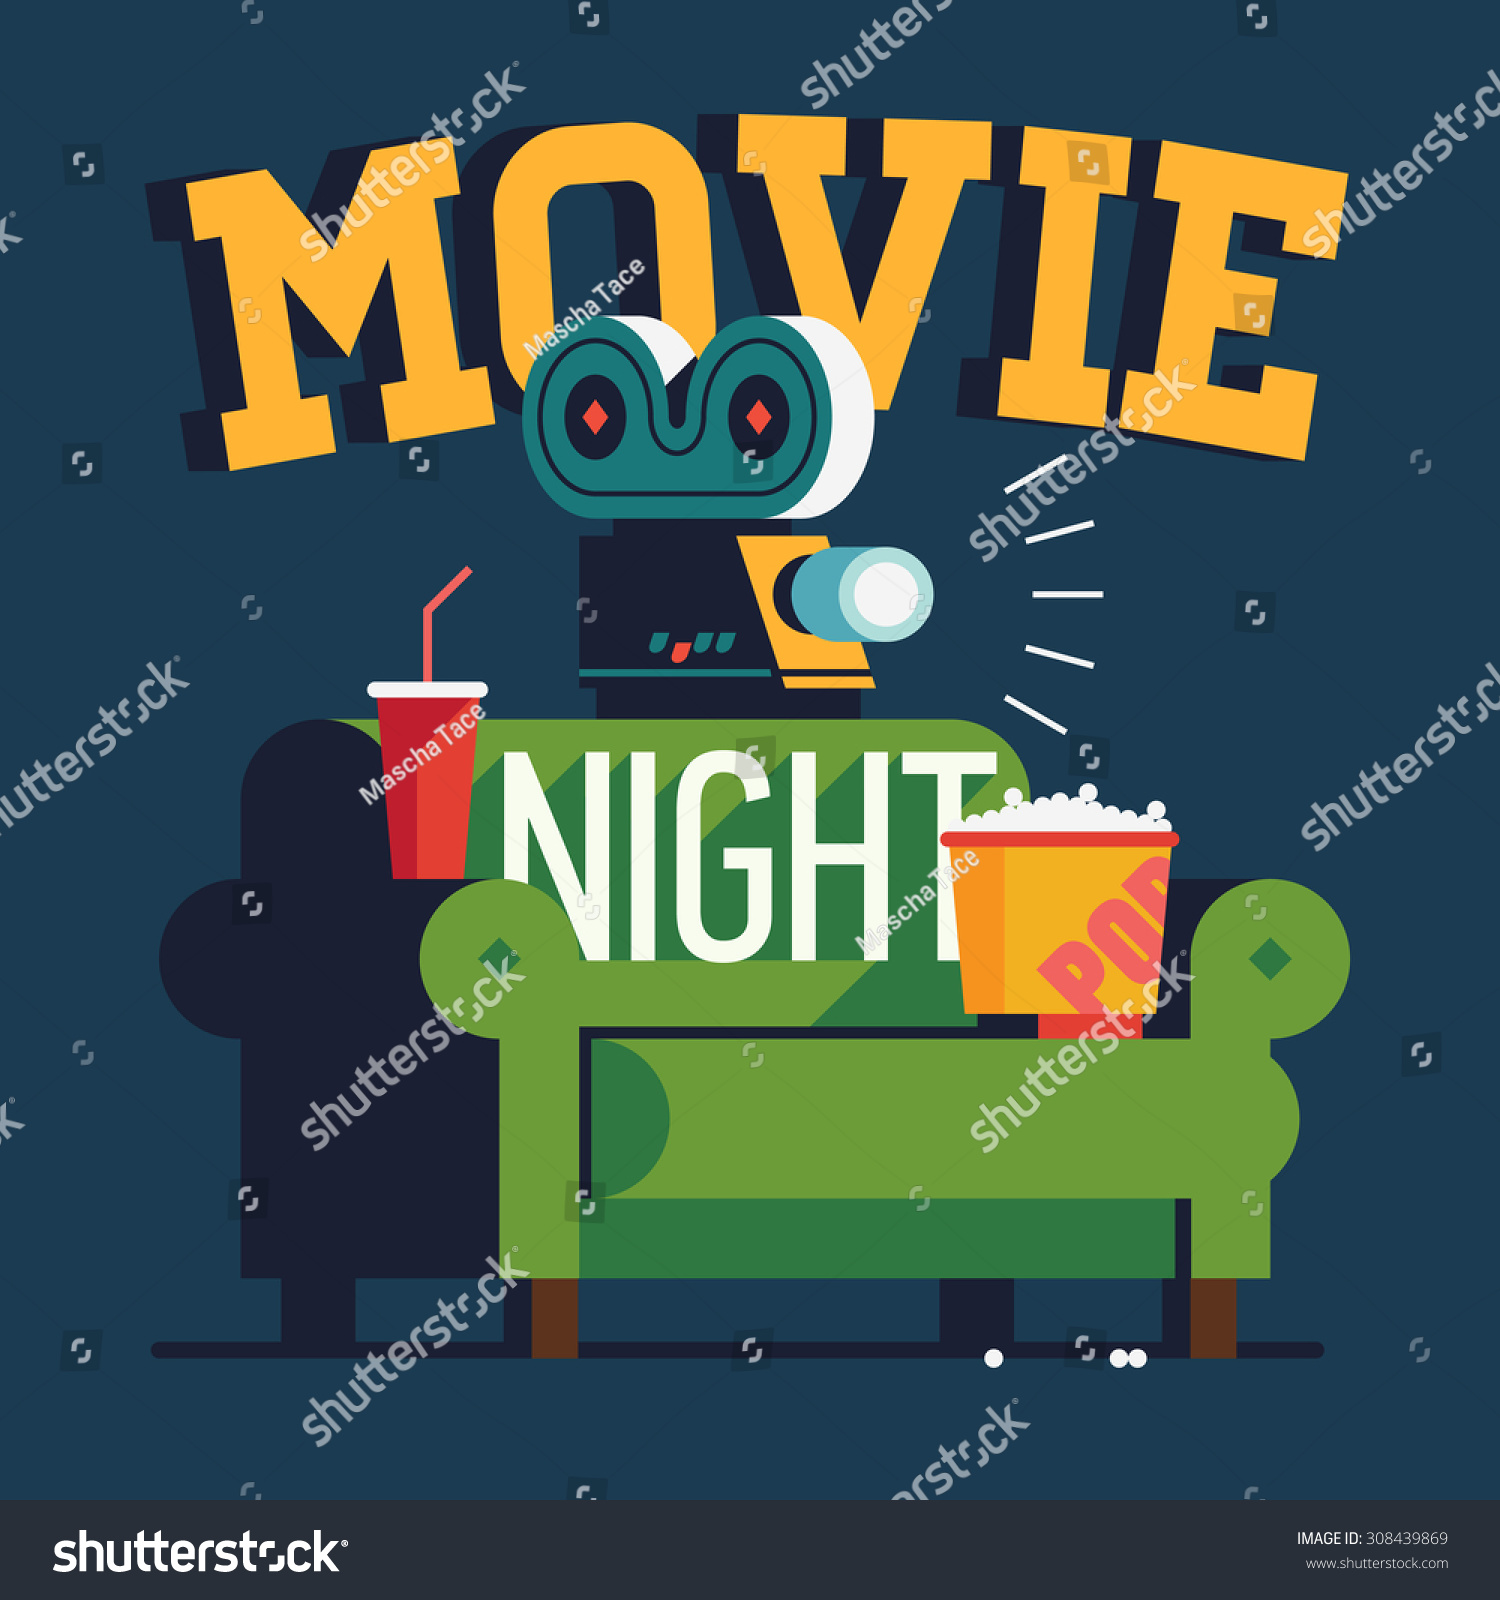 Download Cool Vector Movie Night Flat Design Stock Vector (Royalty ...